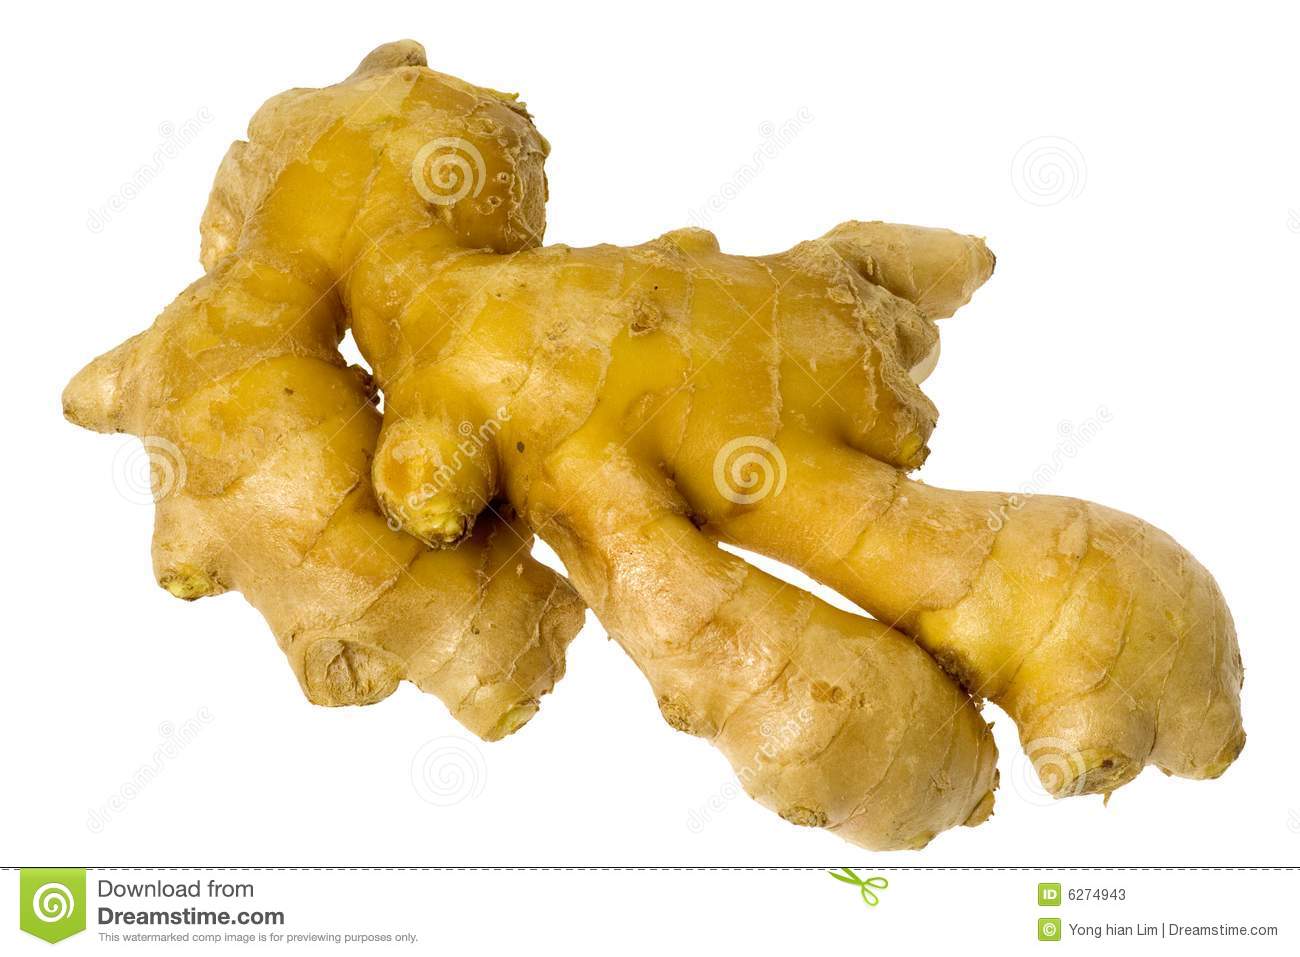 Ginger Root Stock Photos   Image  6274943